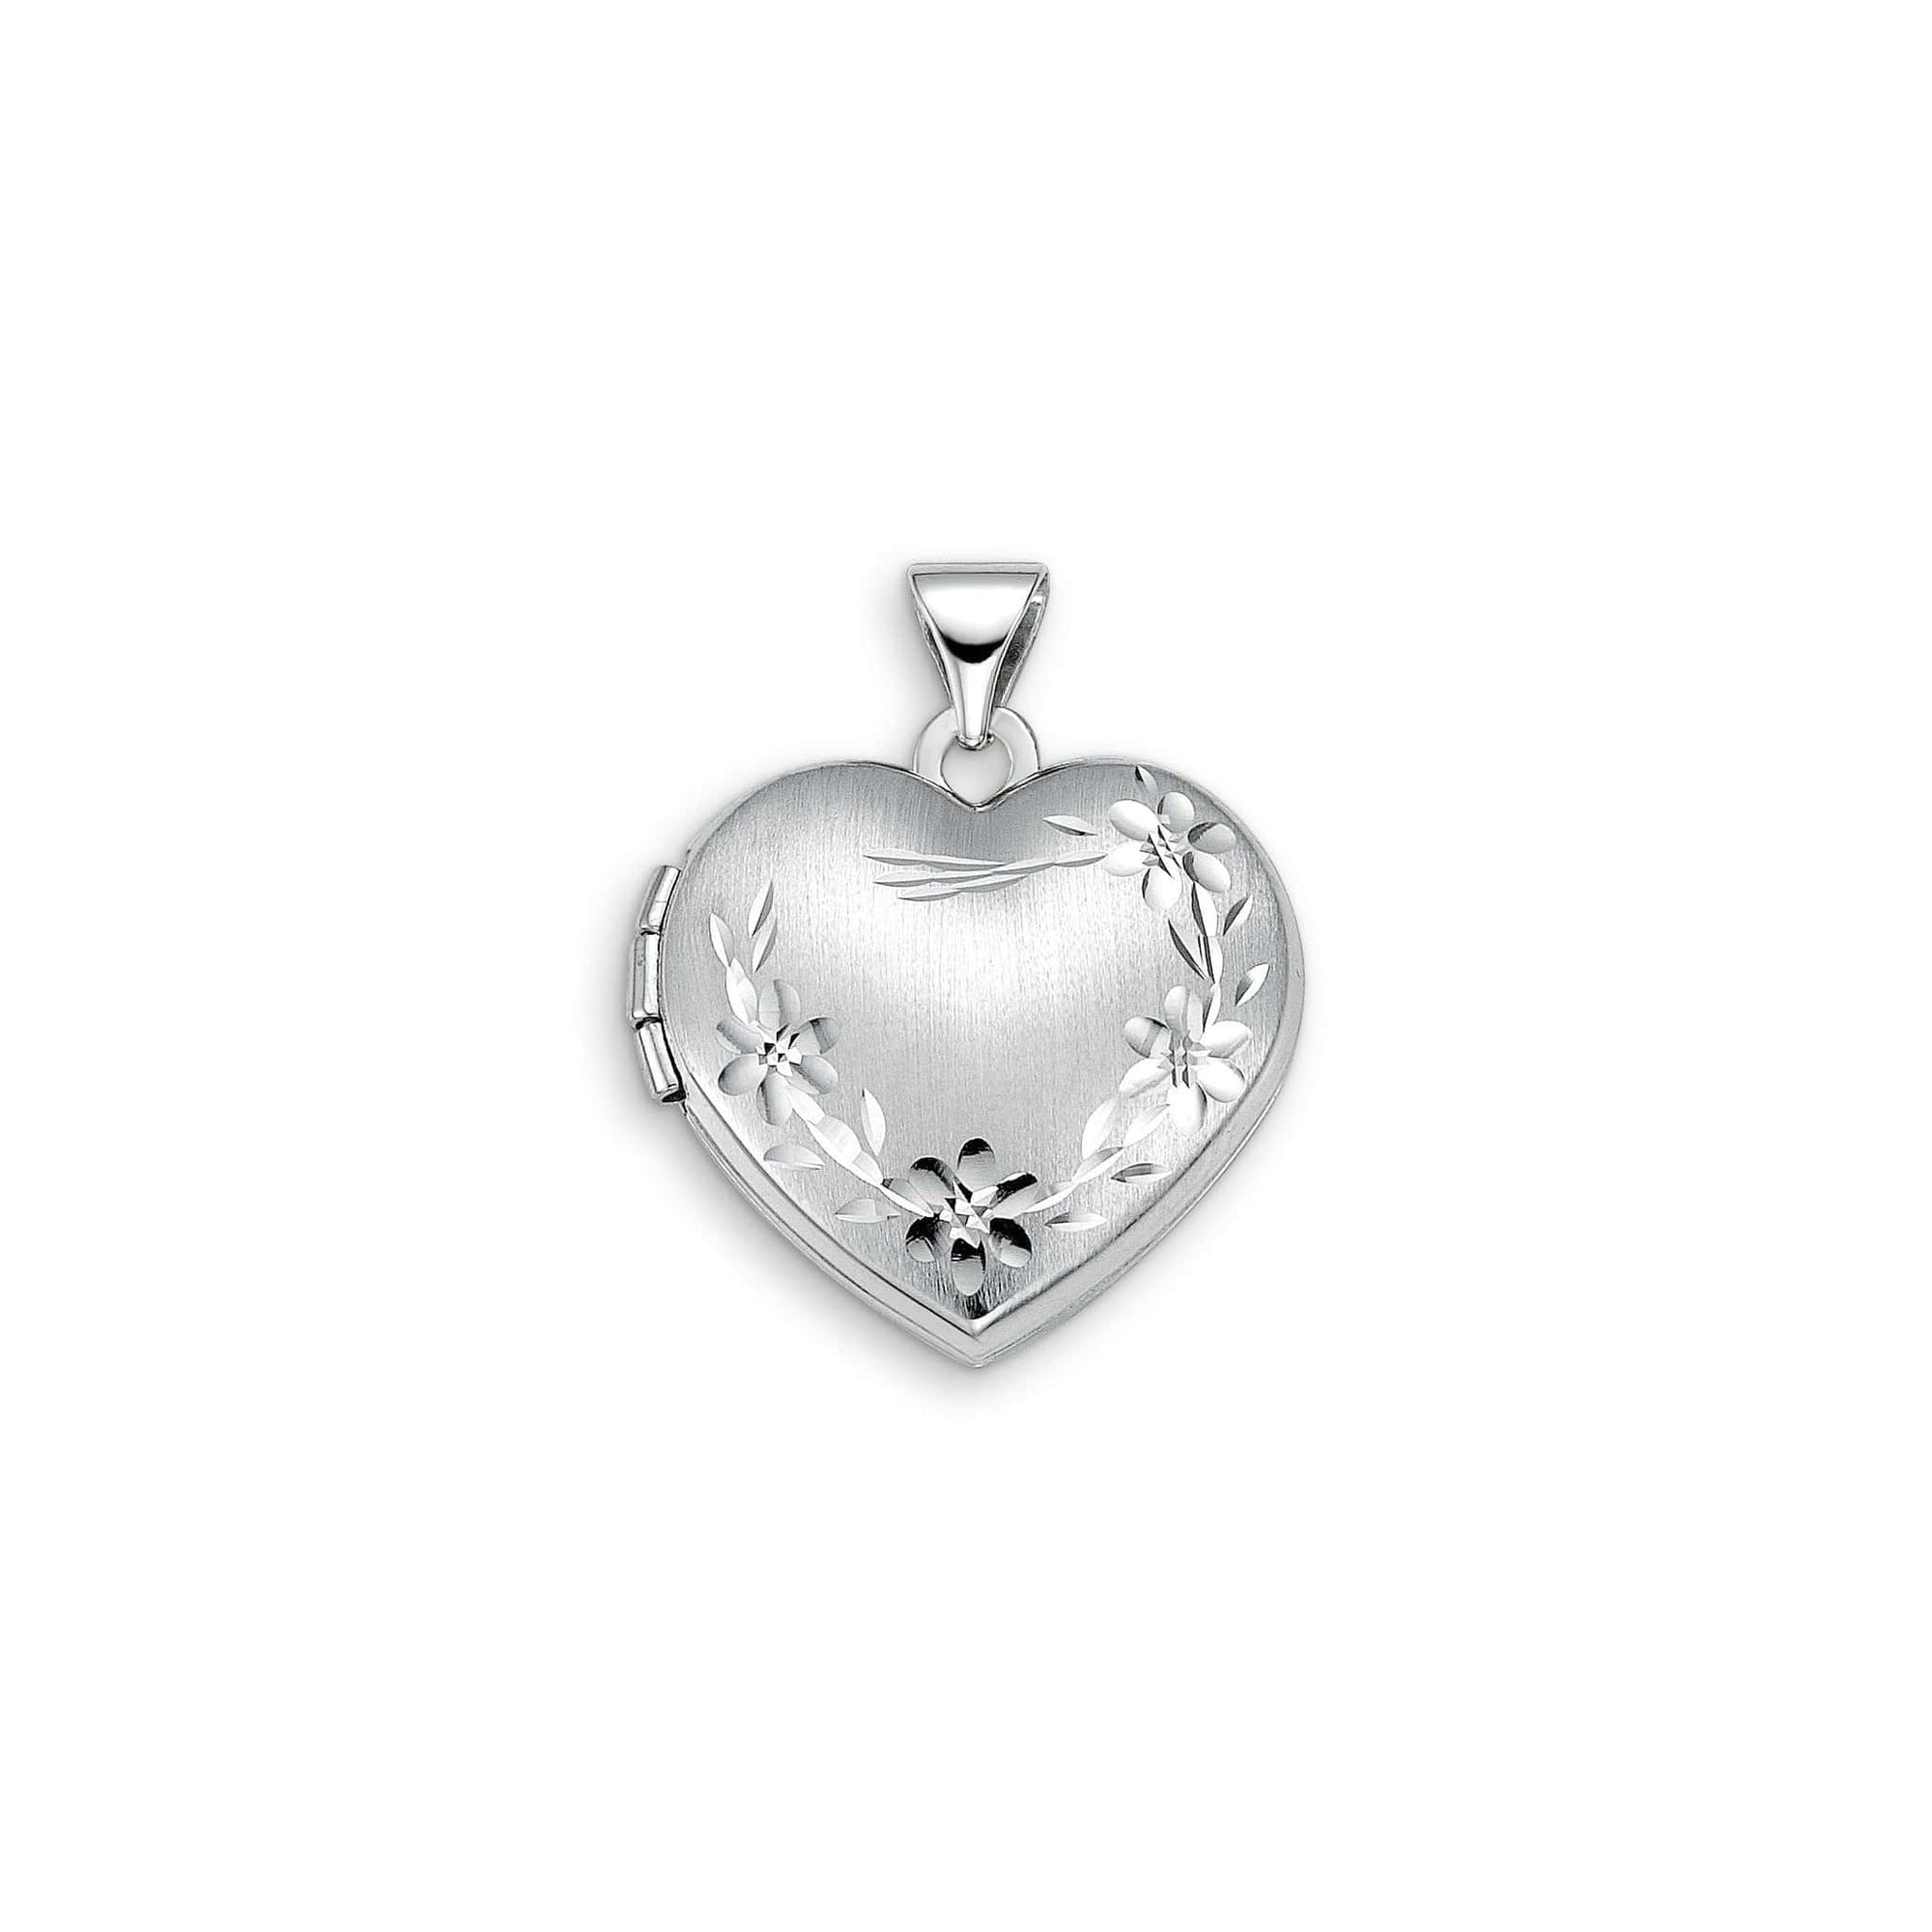 10K Yellow Gold Floral Heart Locket at Arman's Jewellers